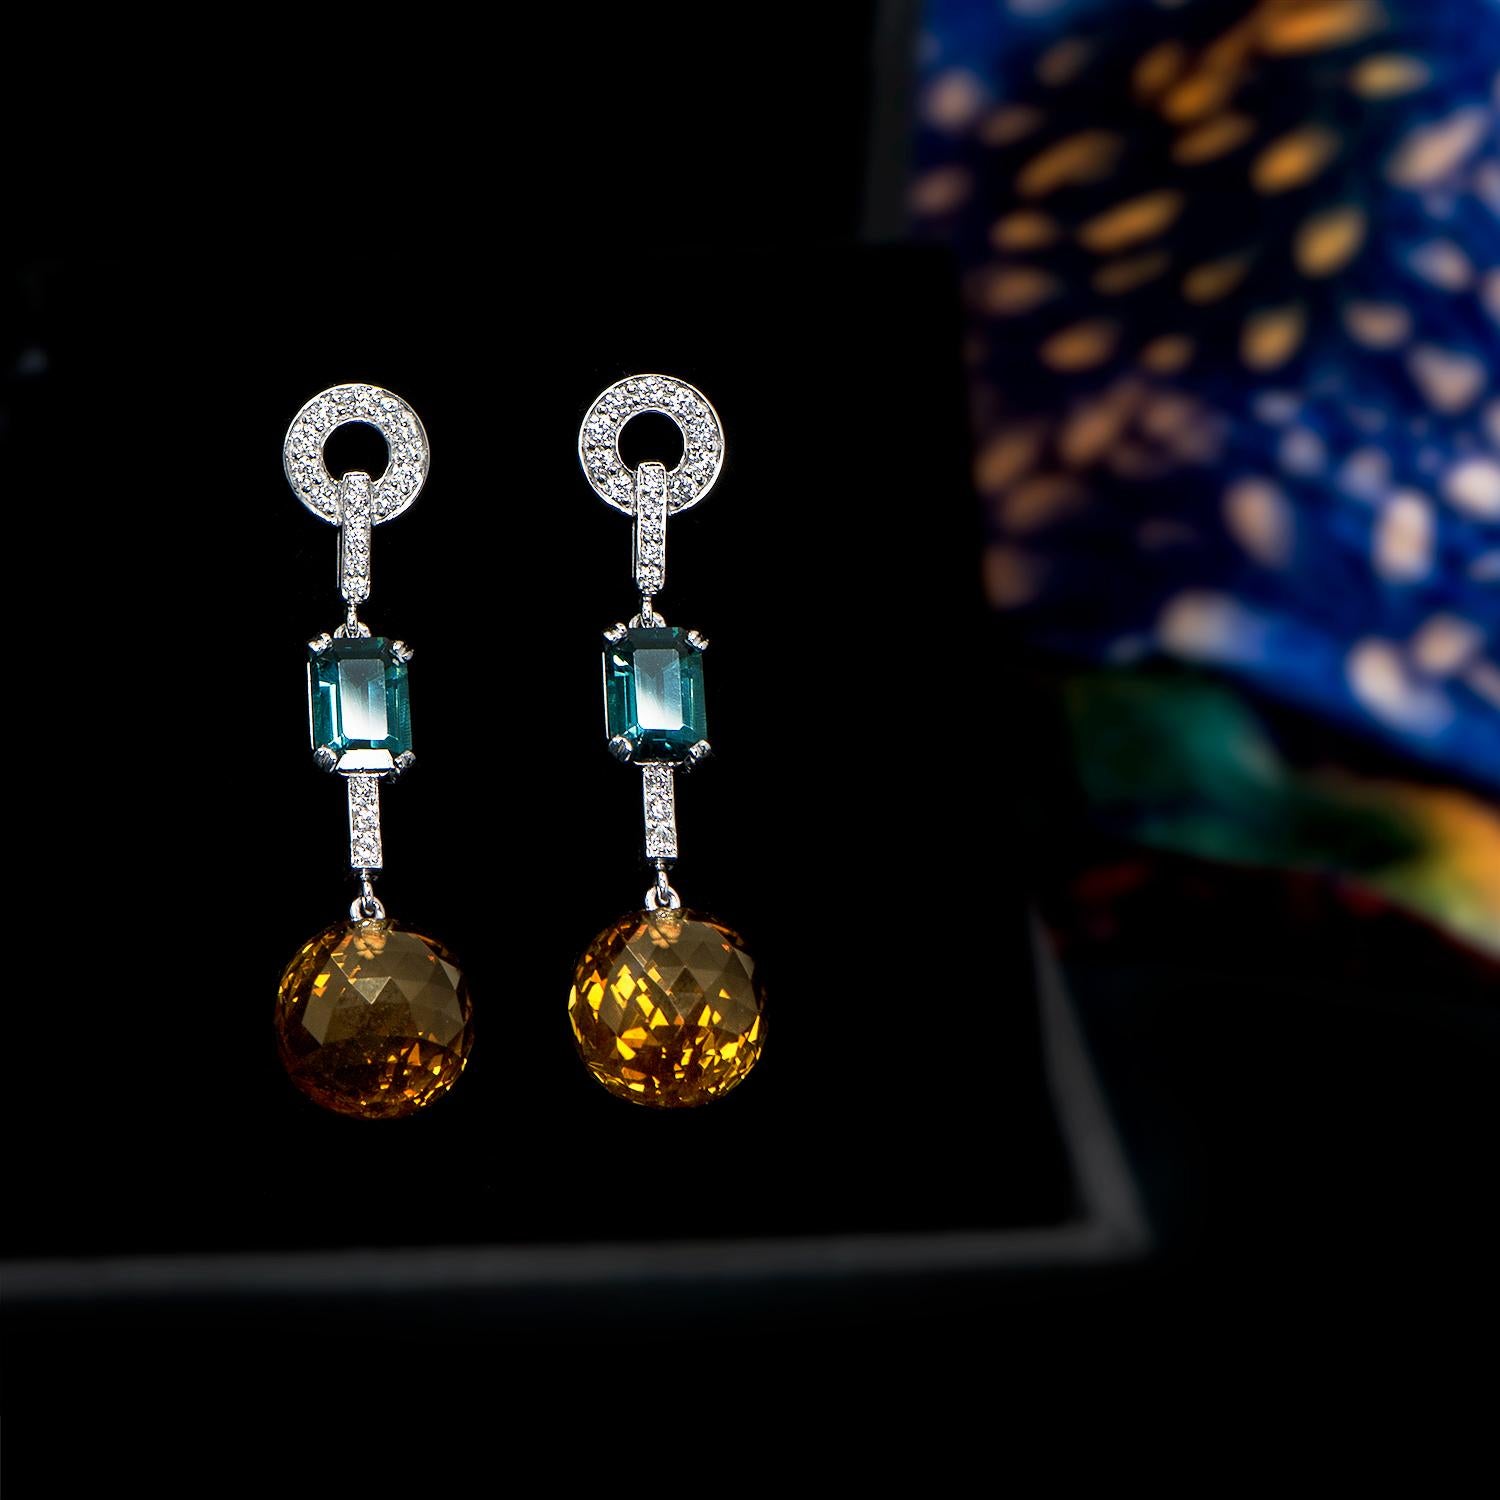 A beautiful pair of long drop earrings using Emerald Cut Blue Tourmalines with a total weight of 1.95 carat and citrine briolette balls (total weight of 18.61 carats) to stunning effect! An unforgettable combination of colours offset by white